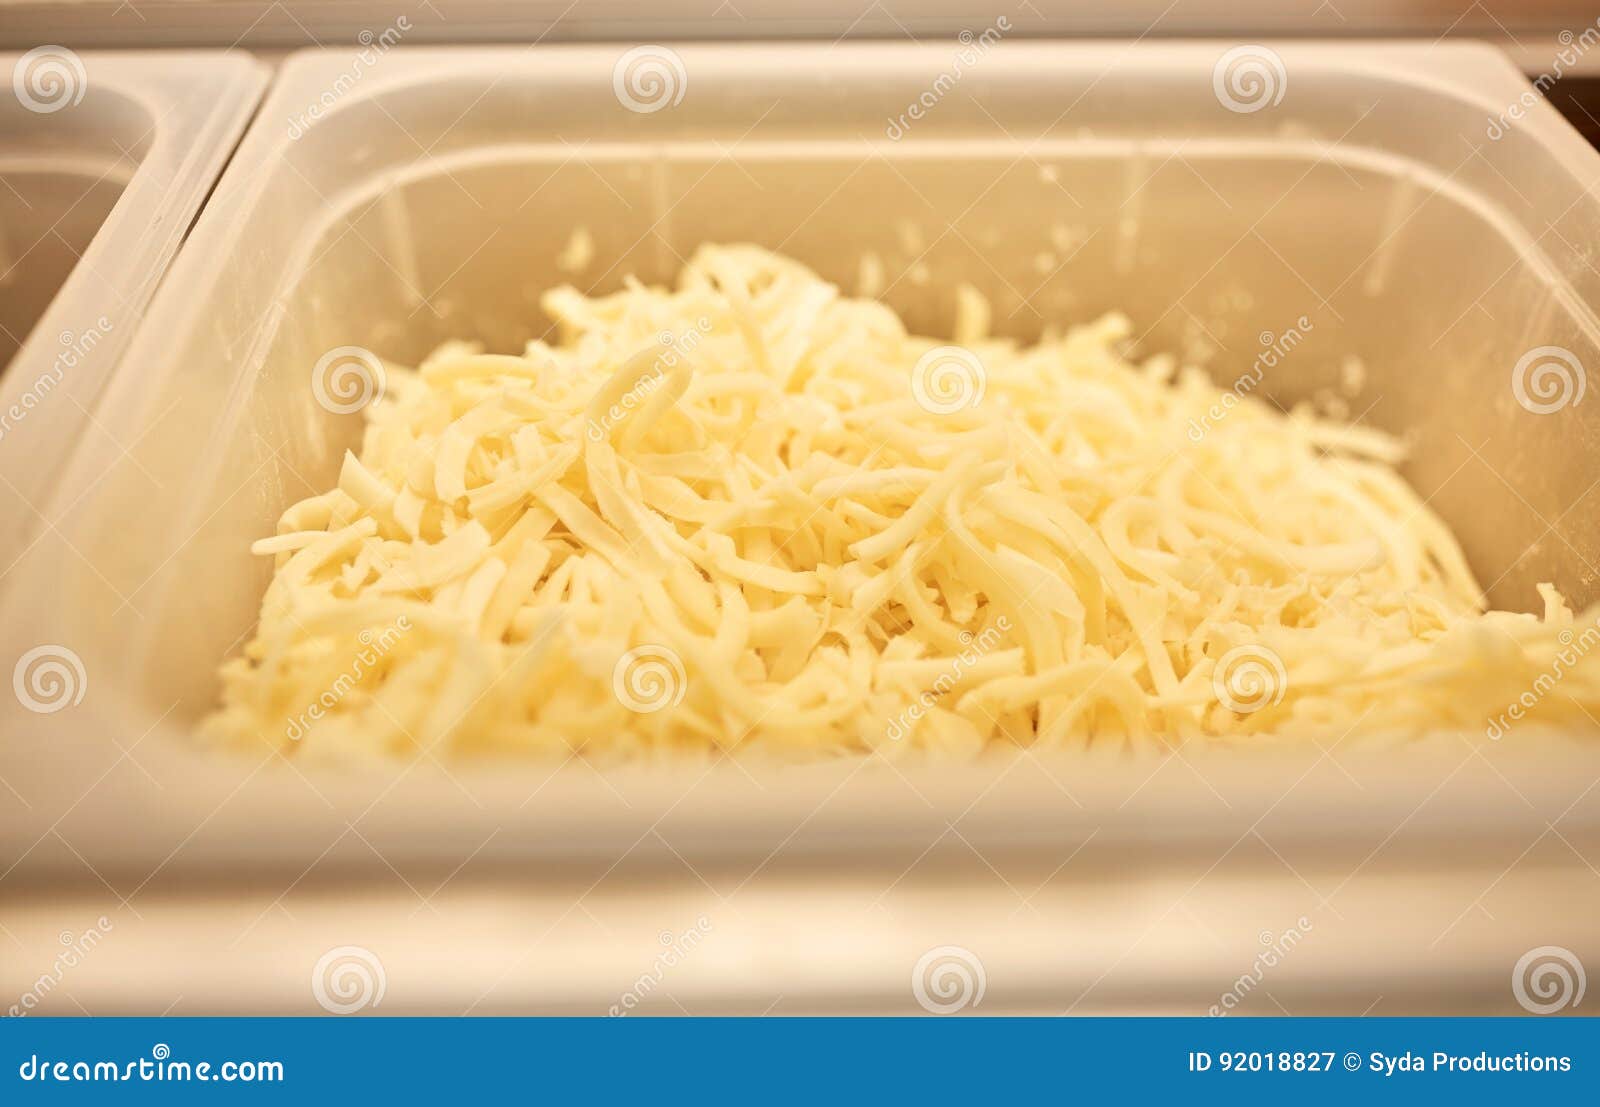 https://thumbs.dreamstime.com/z/container-grated-cheese-restaurant-kitchen-cooking-storage-food-concept-92018827.jpg